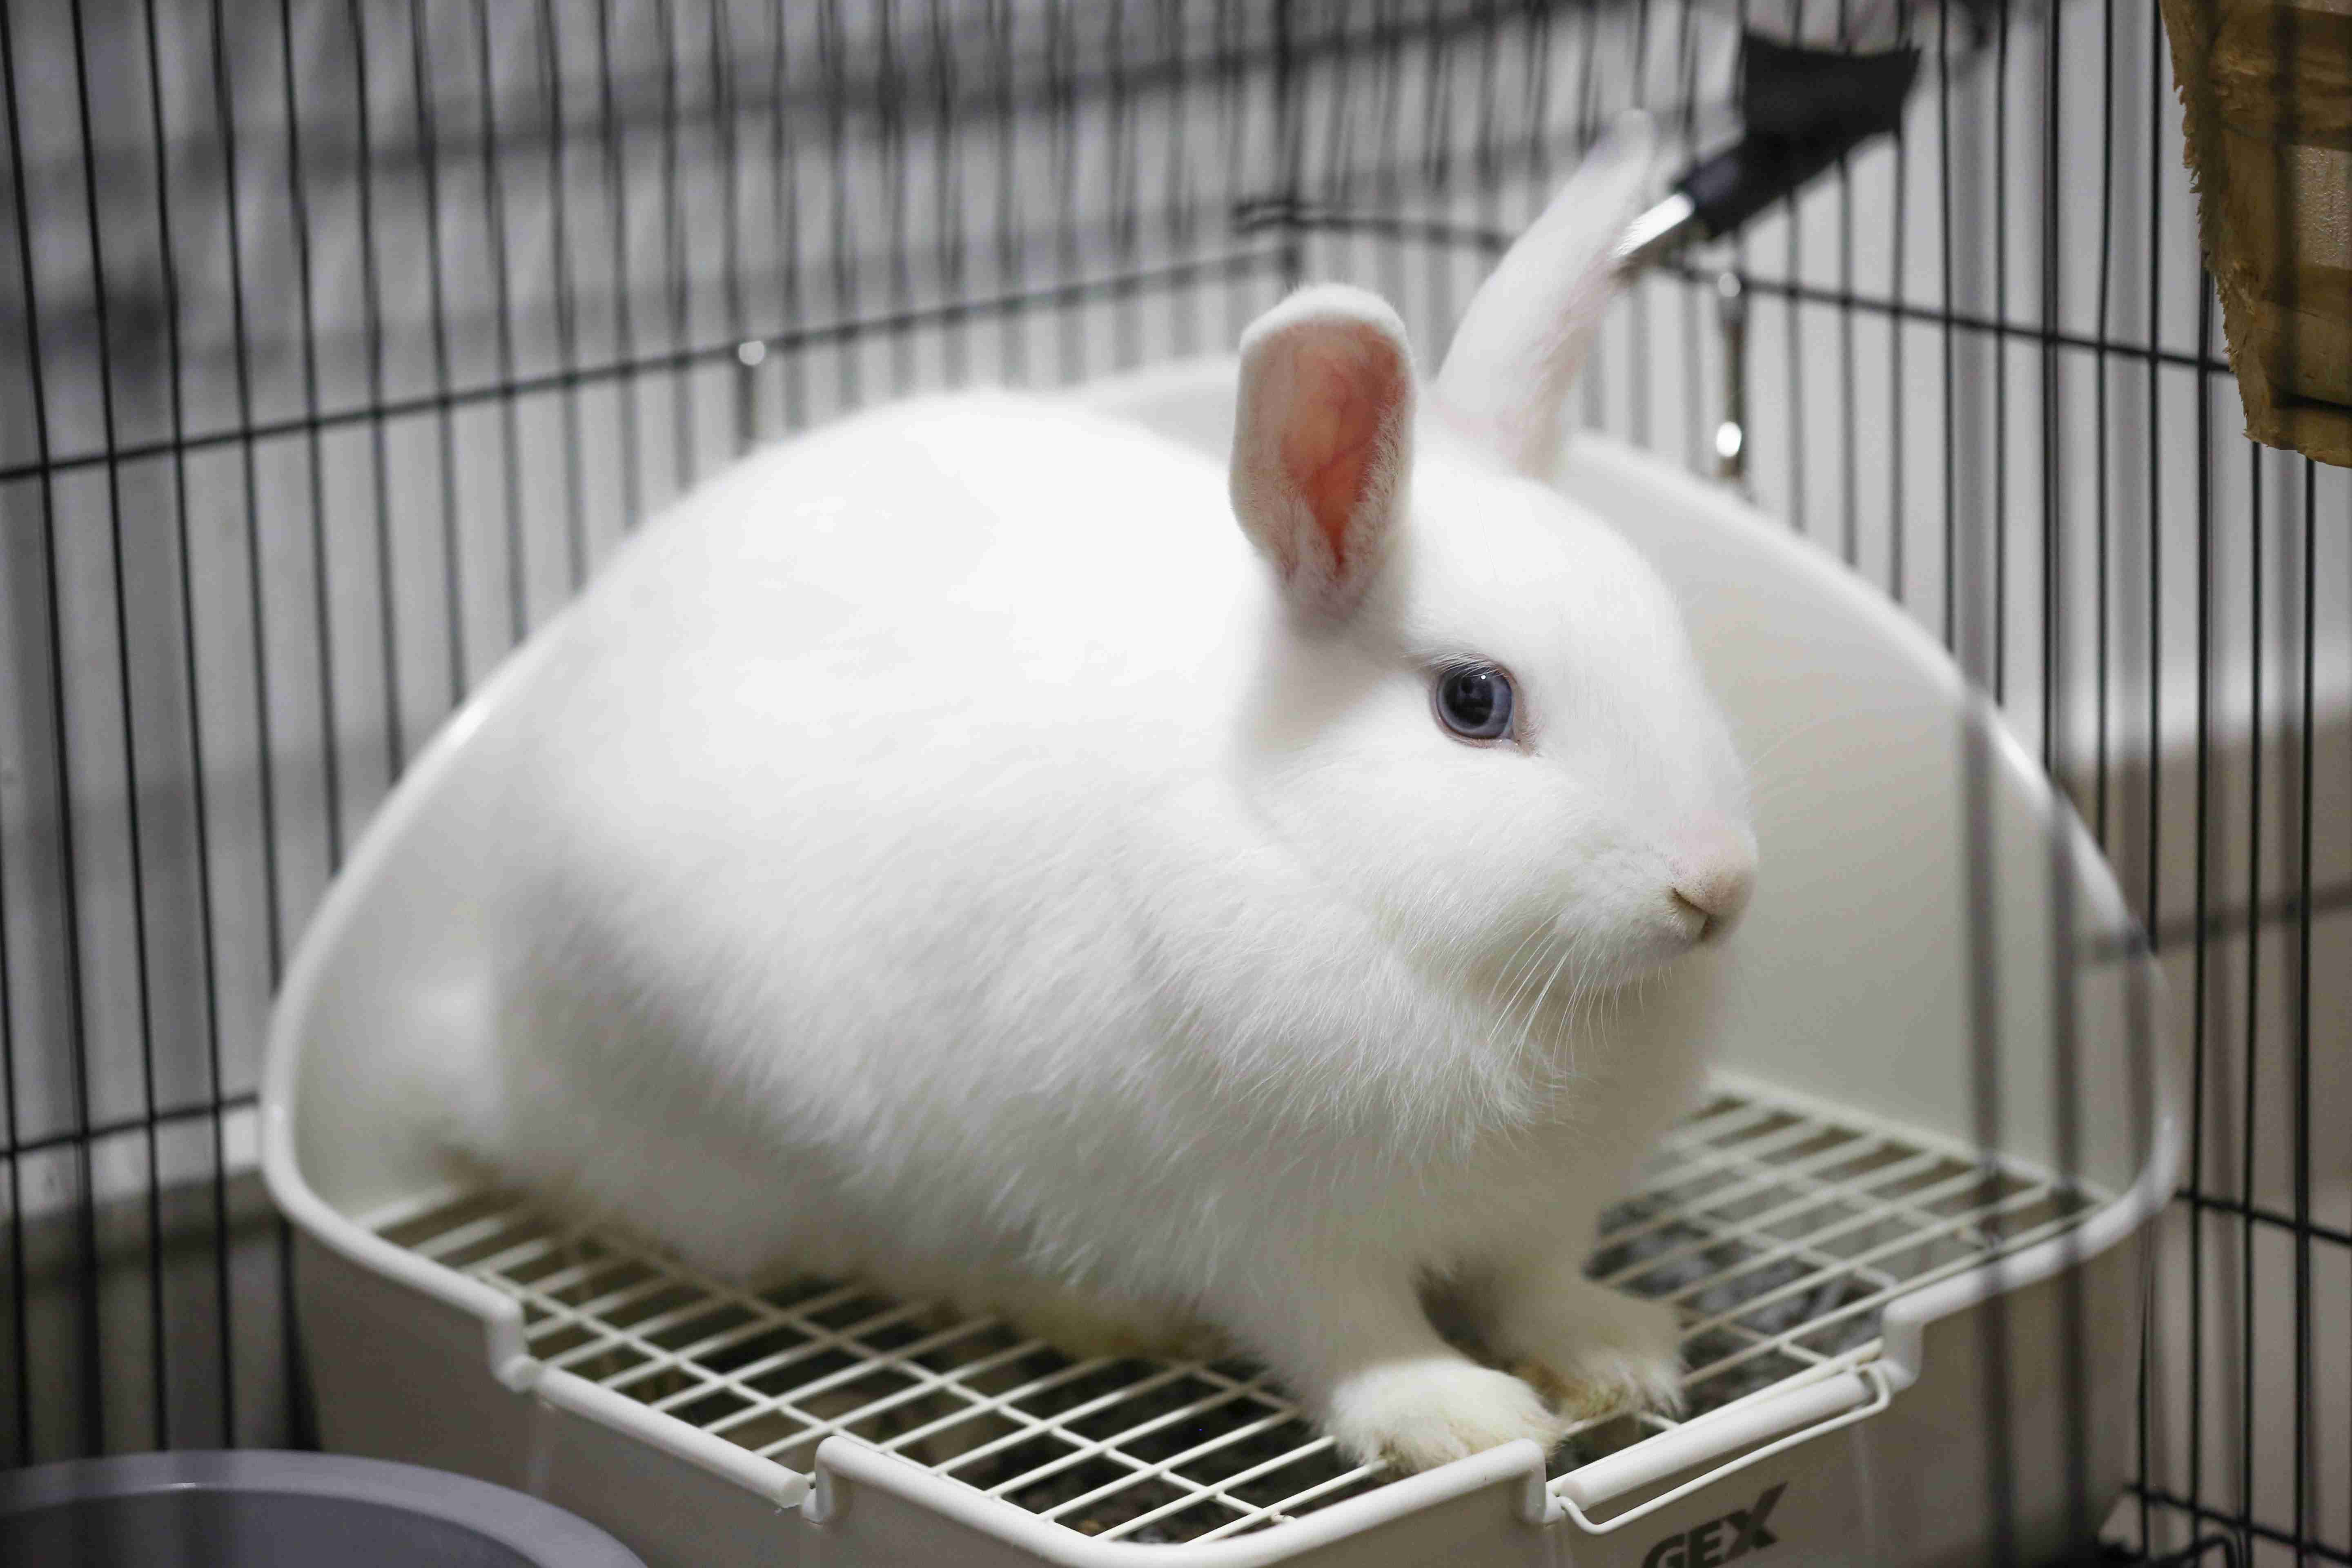 Training Your Rabbit: Discovering Whether Rabbits Can Be Trained to Come When Called